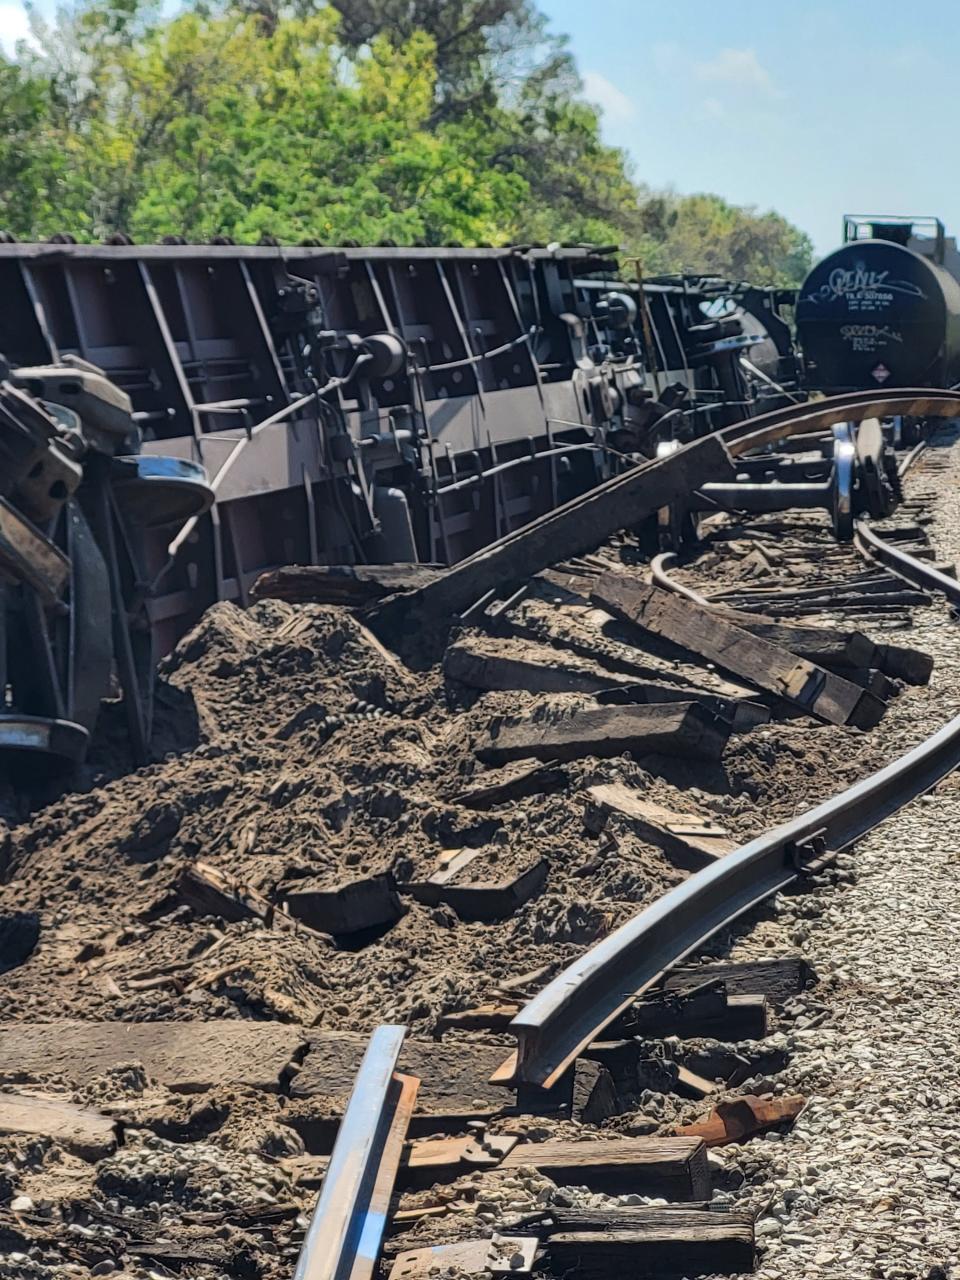 A train carrying sheetrock and thousands of gallons of liquid propane gas derailed at 301 Boulevard East and 16th street on Tuesday, Feb. 28, 2023. There were no injuries reported and there has been no evidence for a leak, officials said.